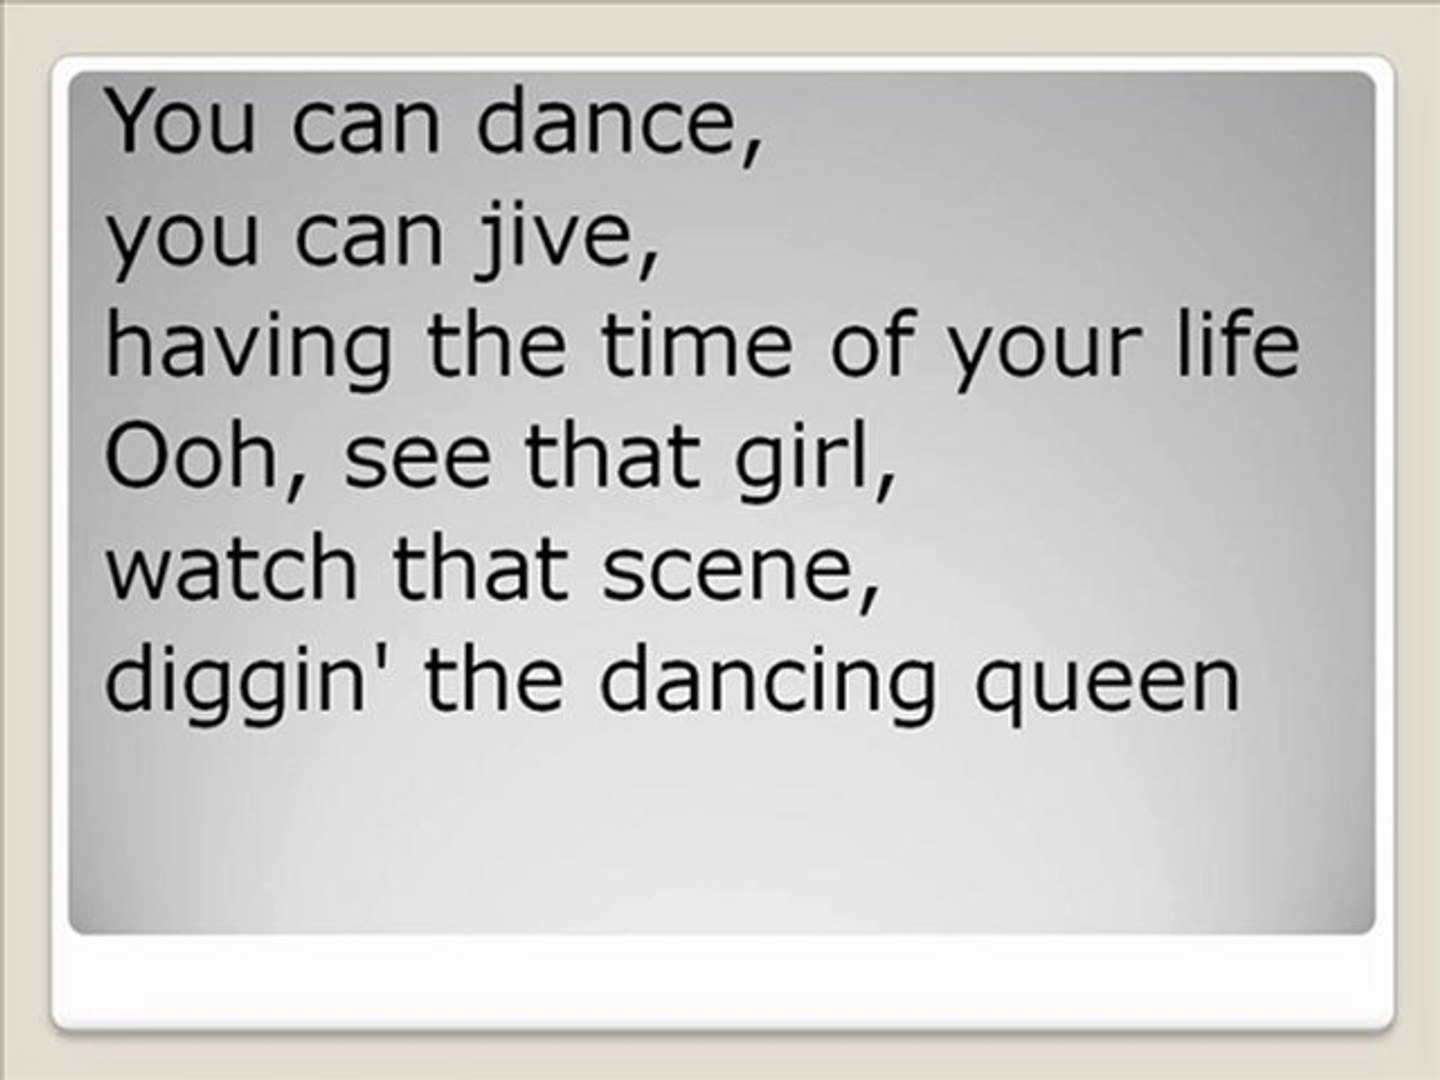 You can dance you can jive